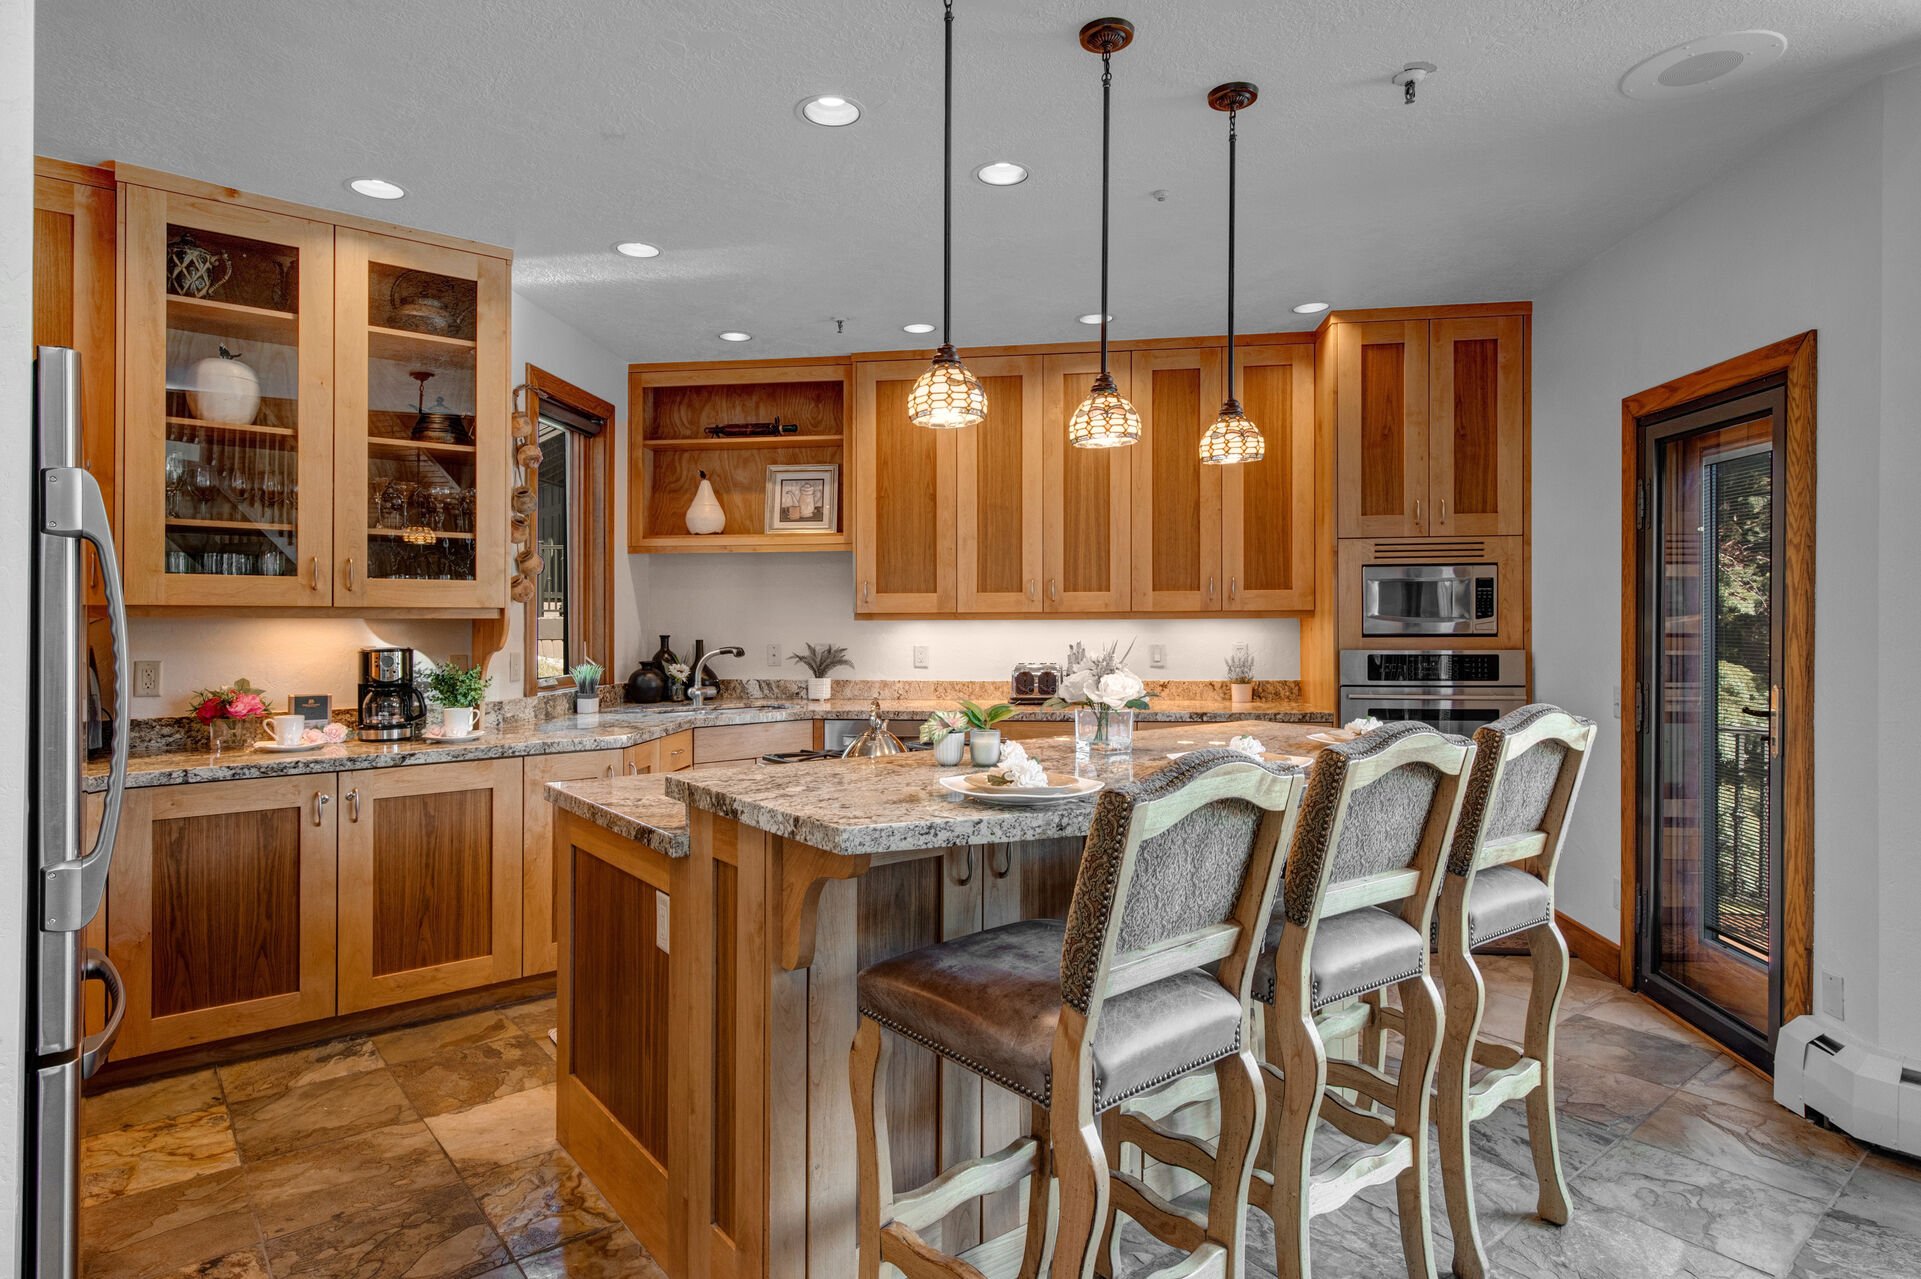 Fully Equipped Kitchen with gorgeous stone countertops, stainless steel appliances, private deck access, and island seating for 3